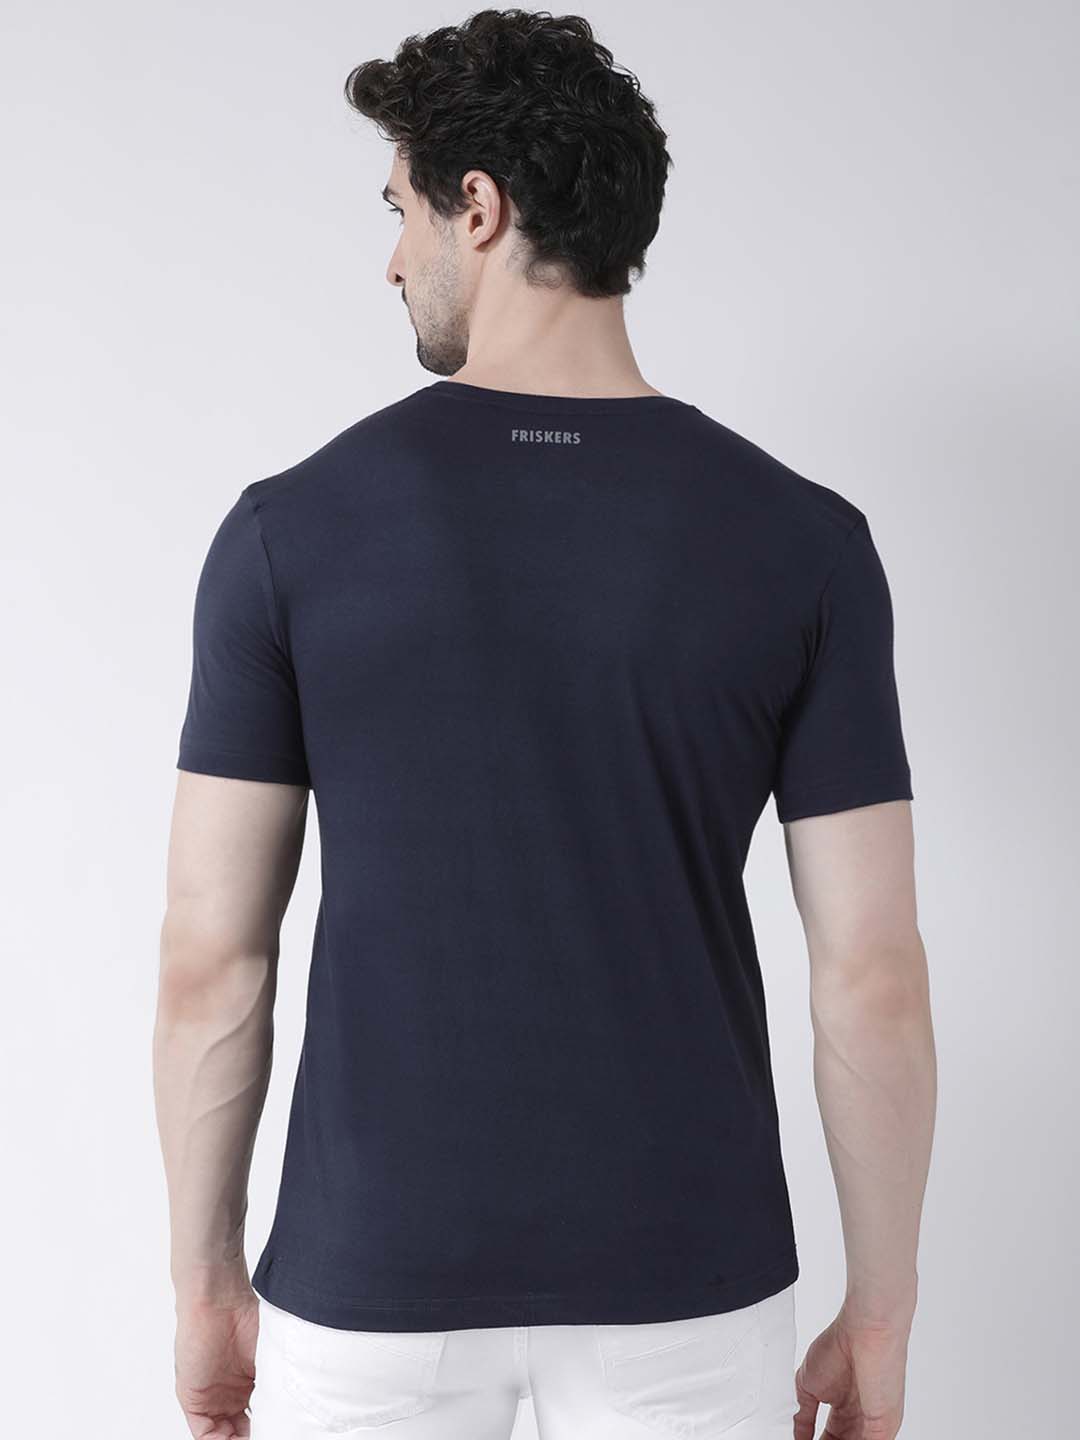 Friskers X Systumm Collection Cotton Round Neck T-Shirt - Friskers